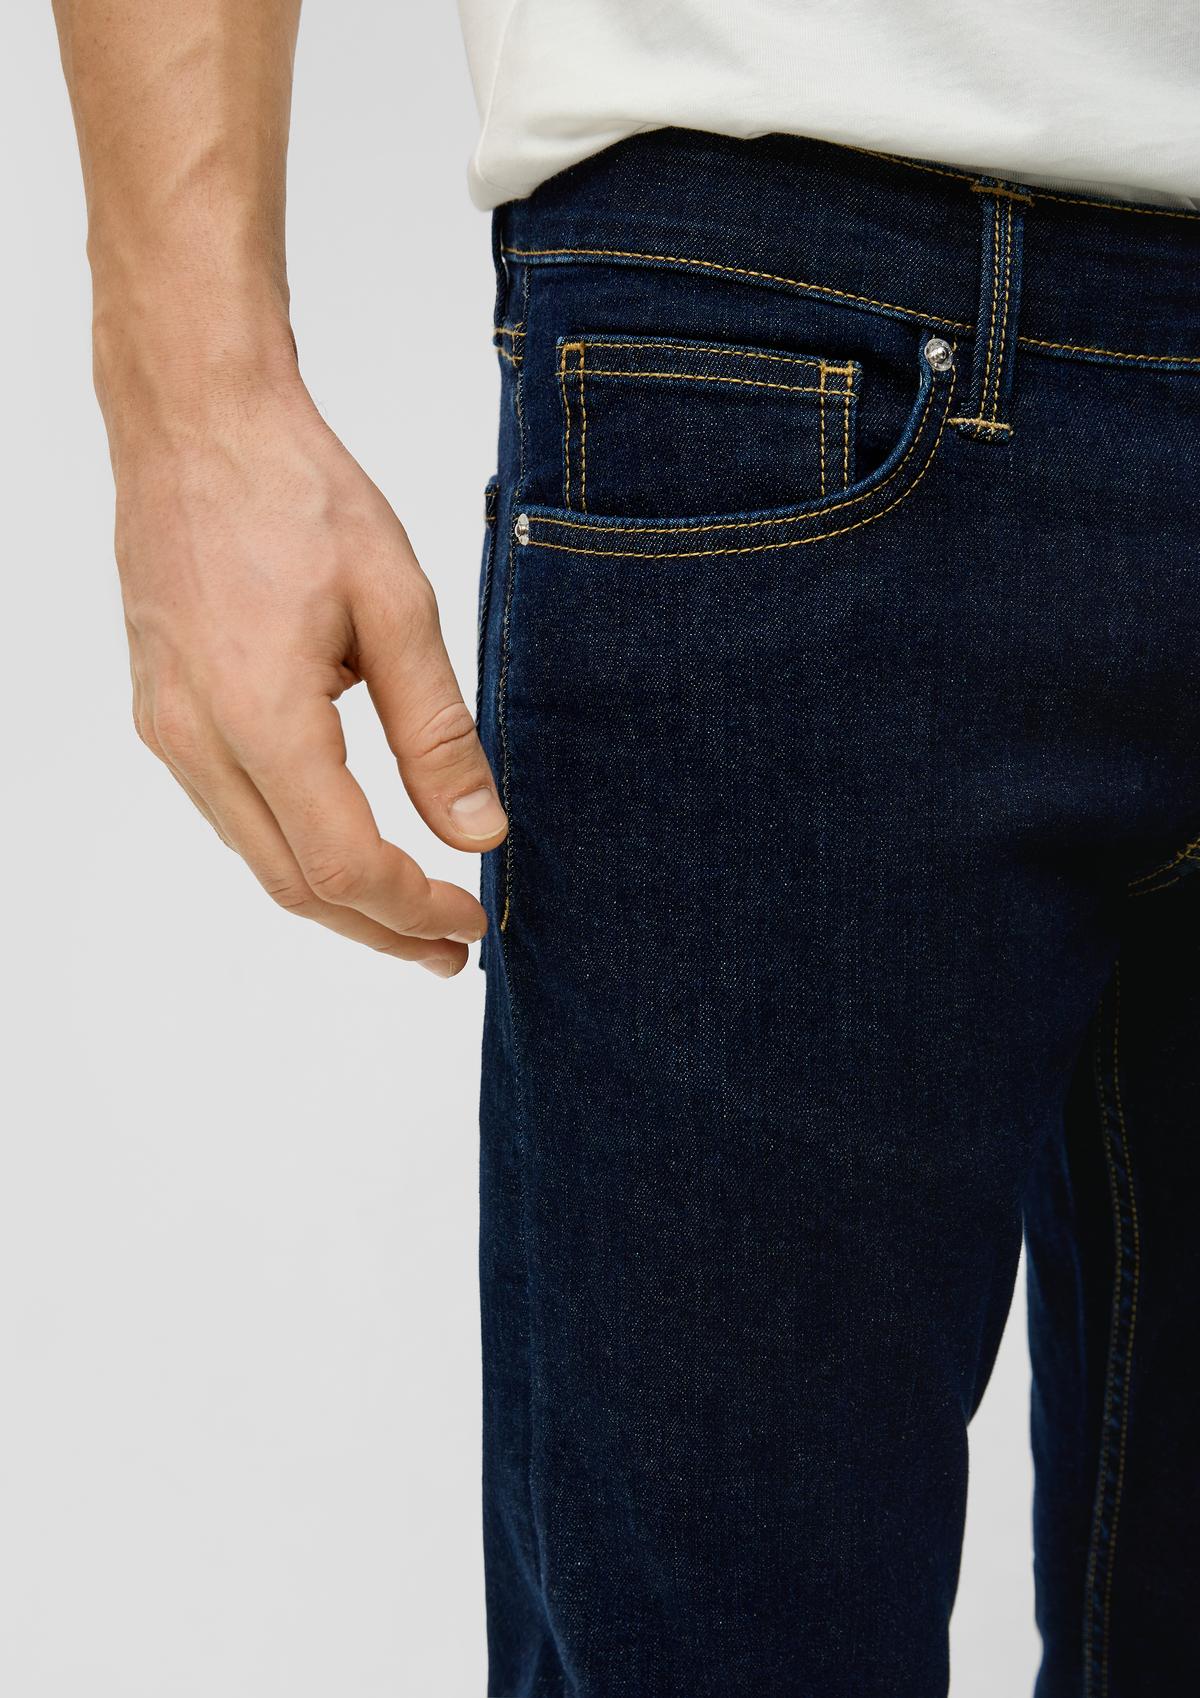 s.Oliver Slim fit: jeans in a 5-pocket style